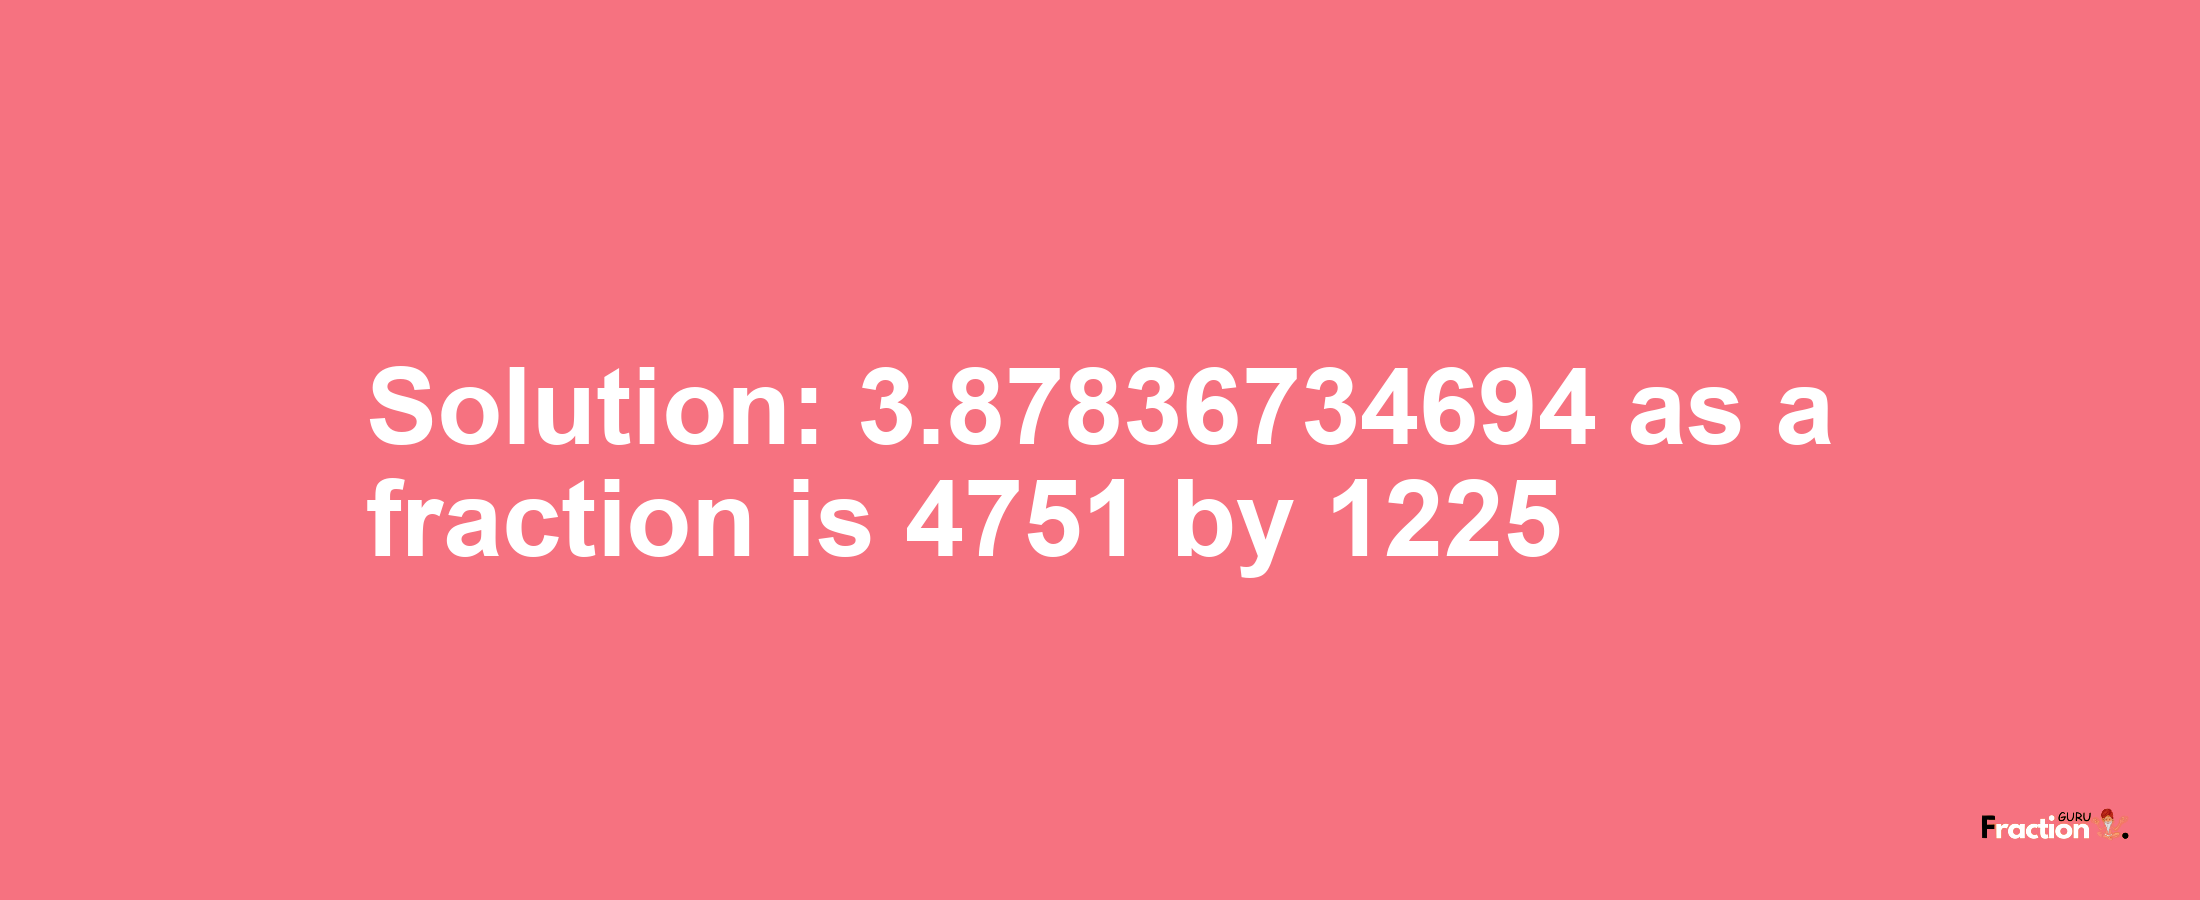 Solution:3.87836734694 as a fraction is 4751/1225